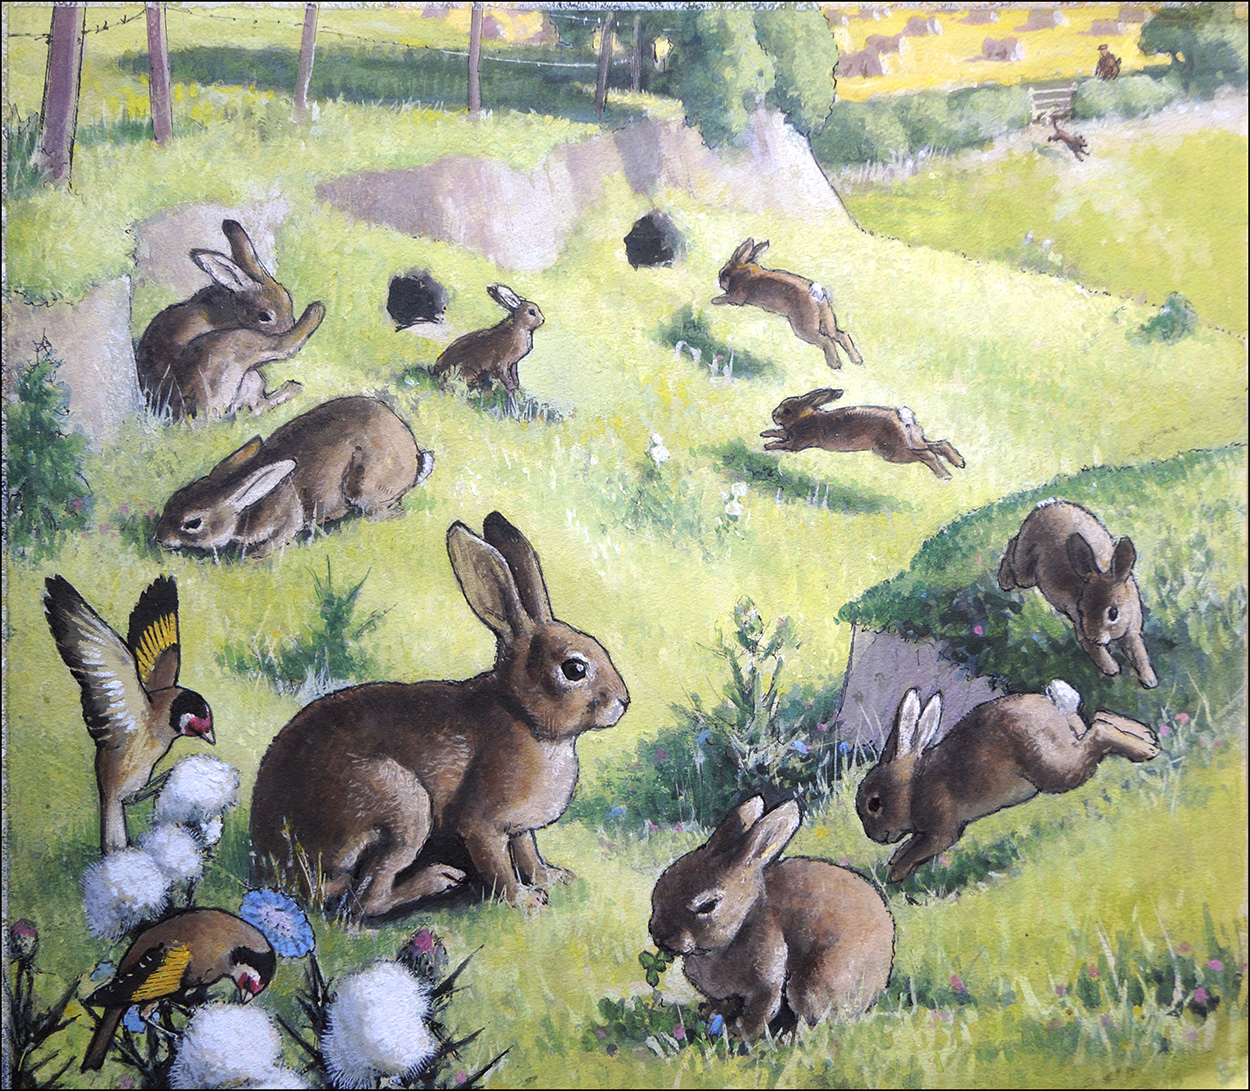 Bouncing Bunnies (Original) art by G W Backhouse at The Illustration Art Gallery